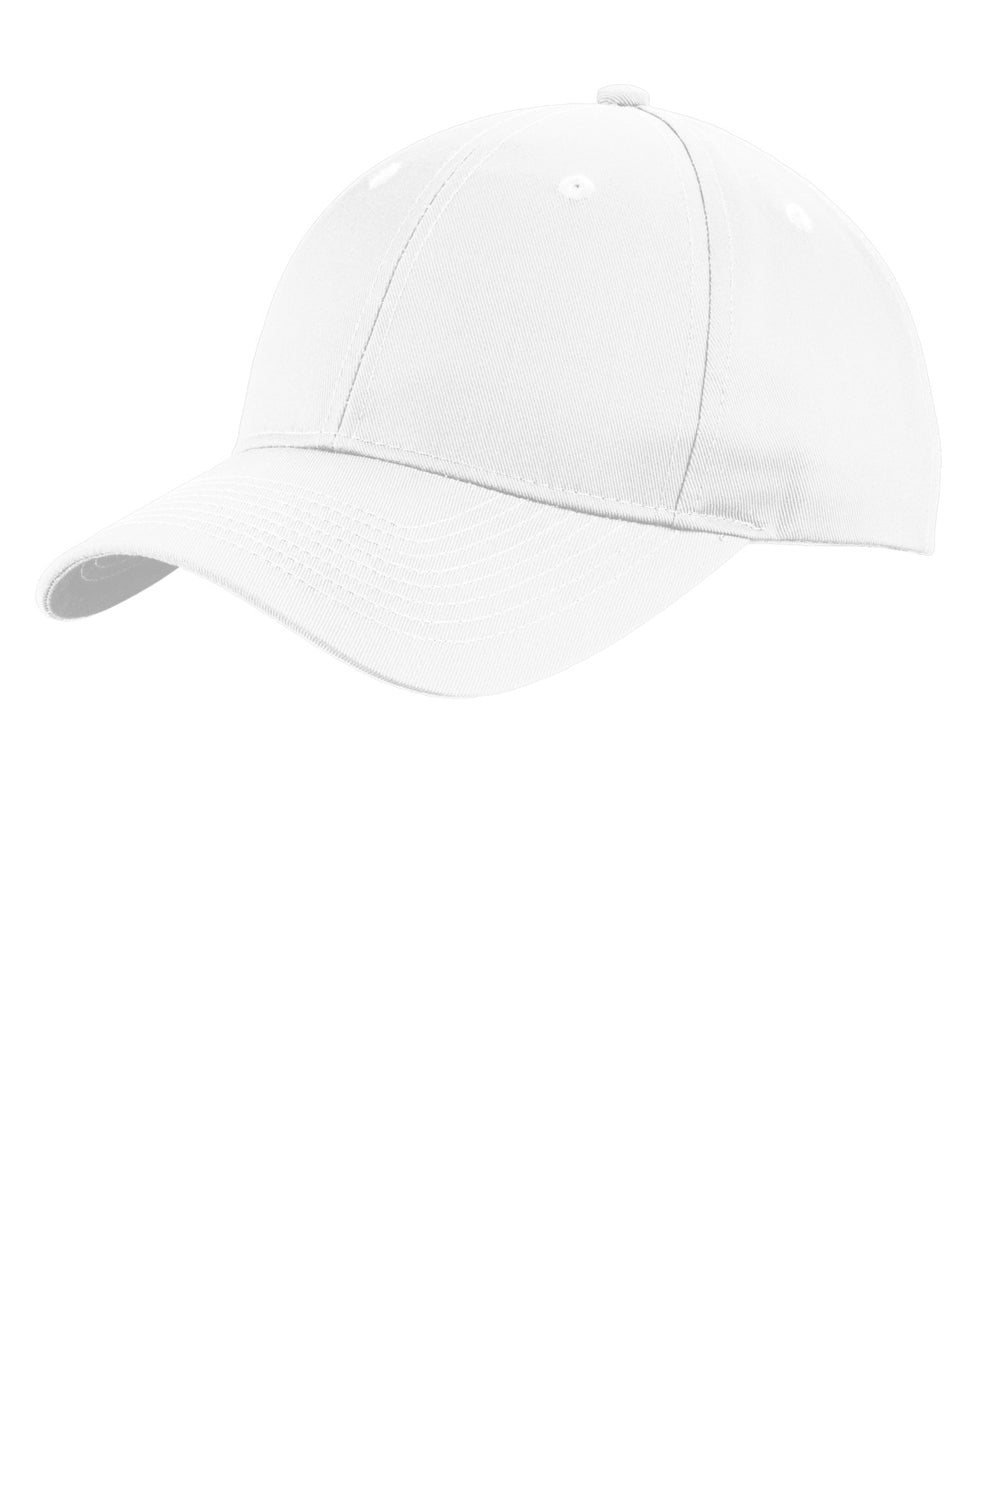 Port Authority C913 Mens Moisture Wicking Adjustable Hat White Front